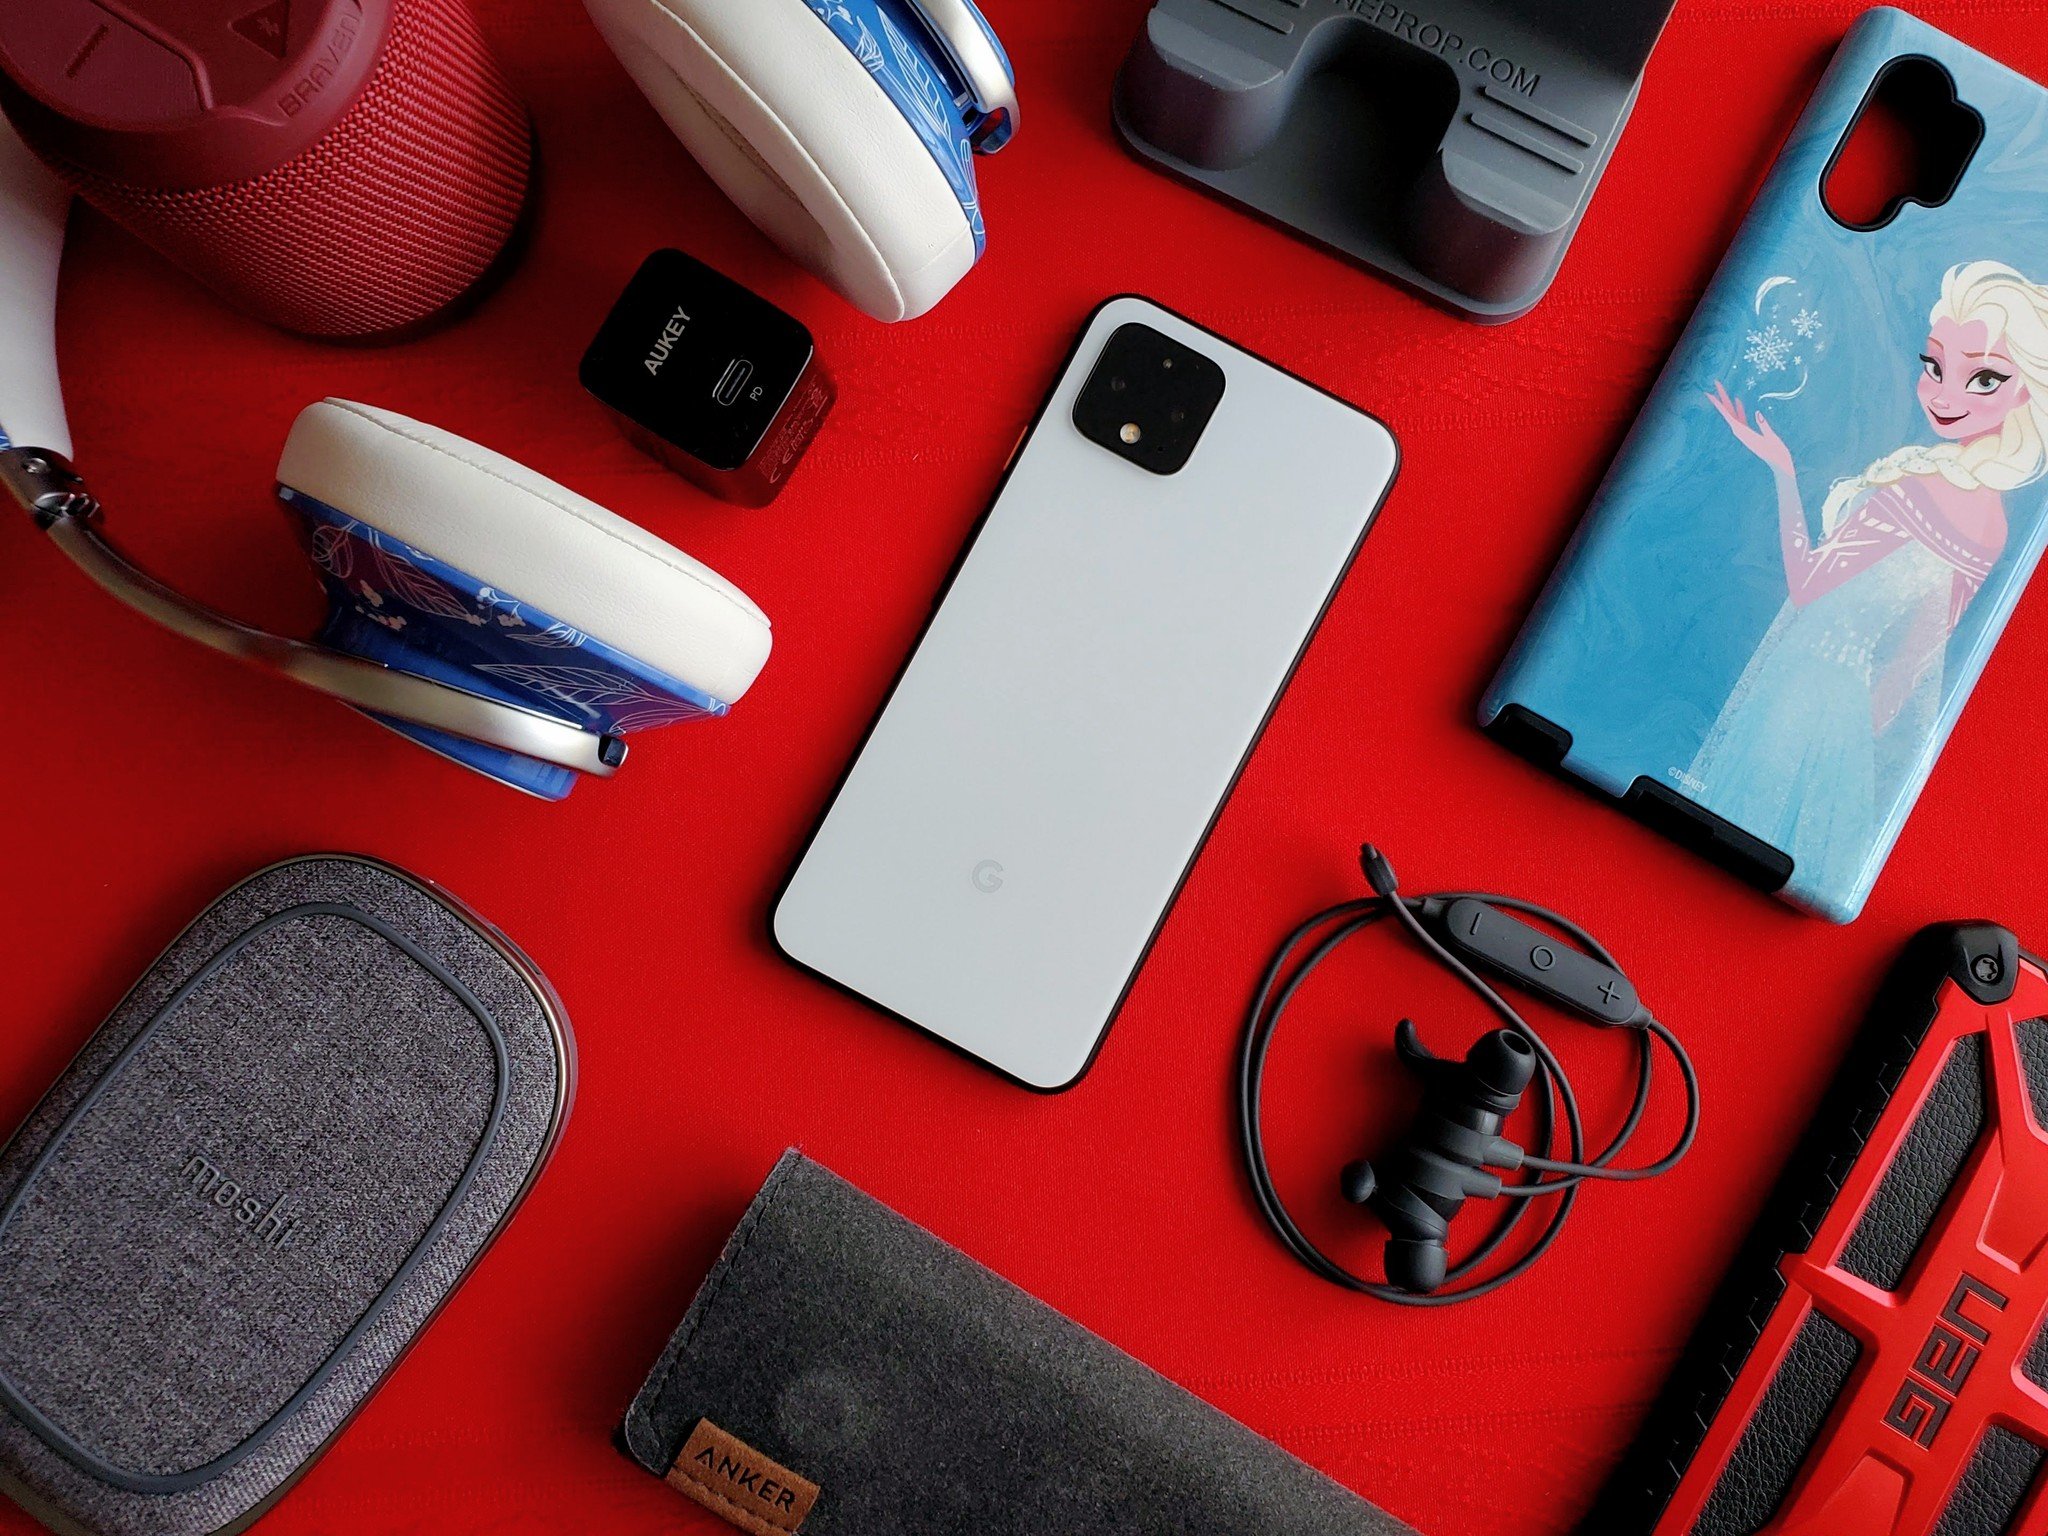 Best Accessories to Buy After Unwrapping Your New Android Phone